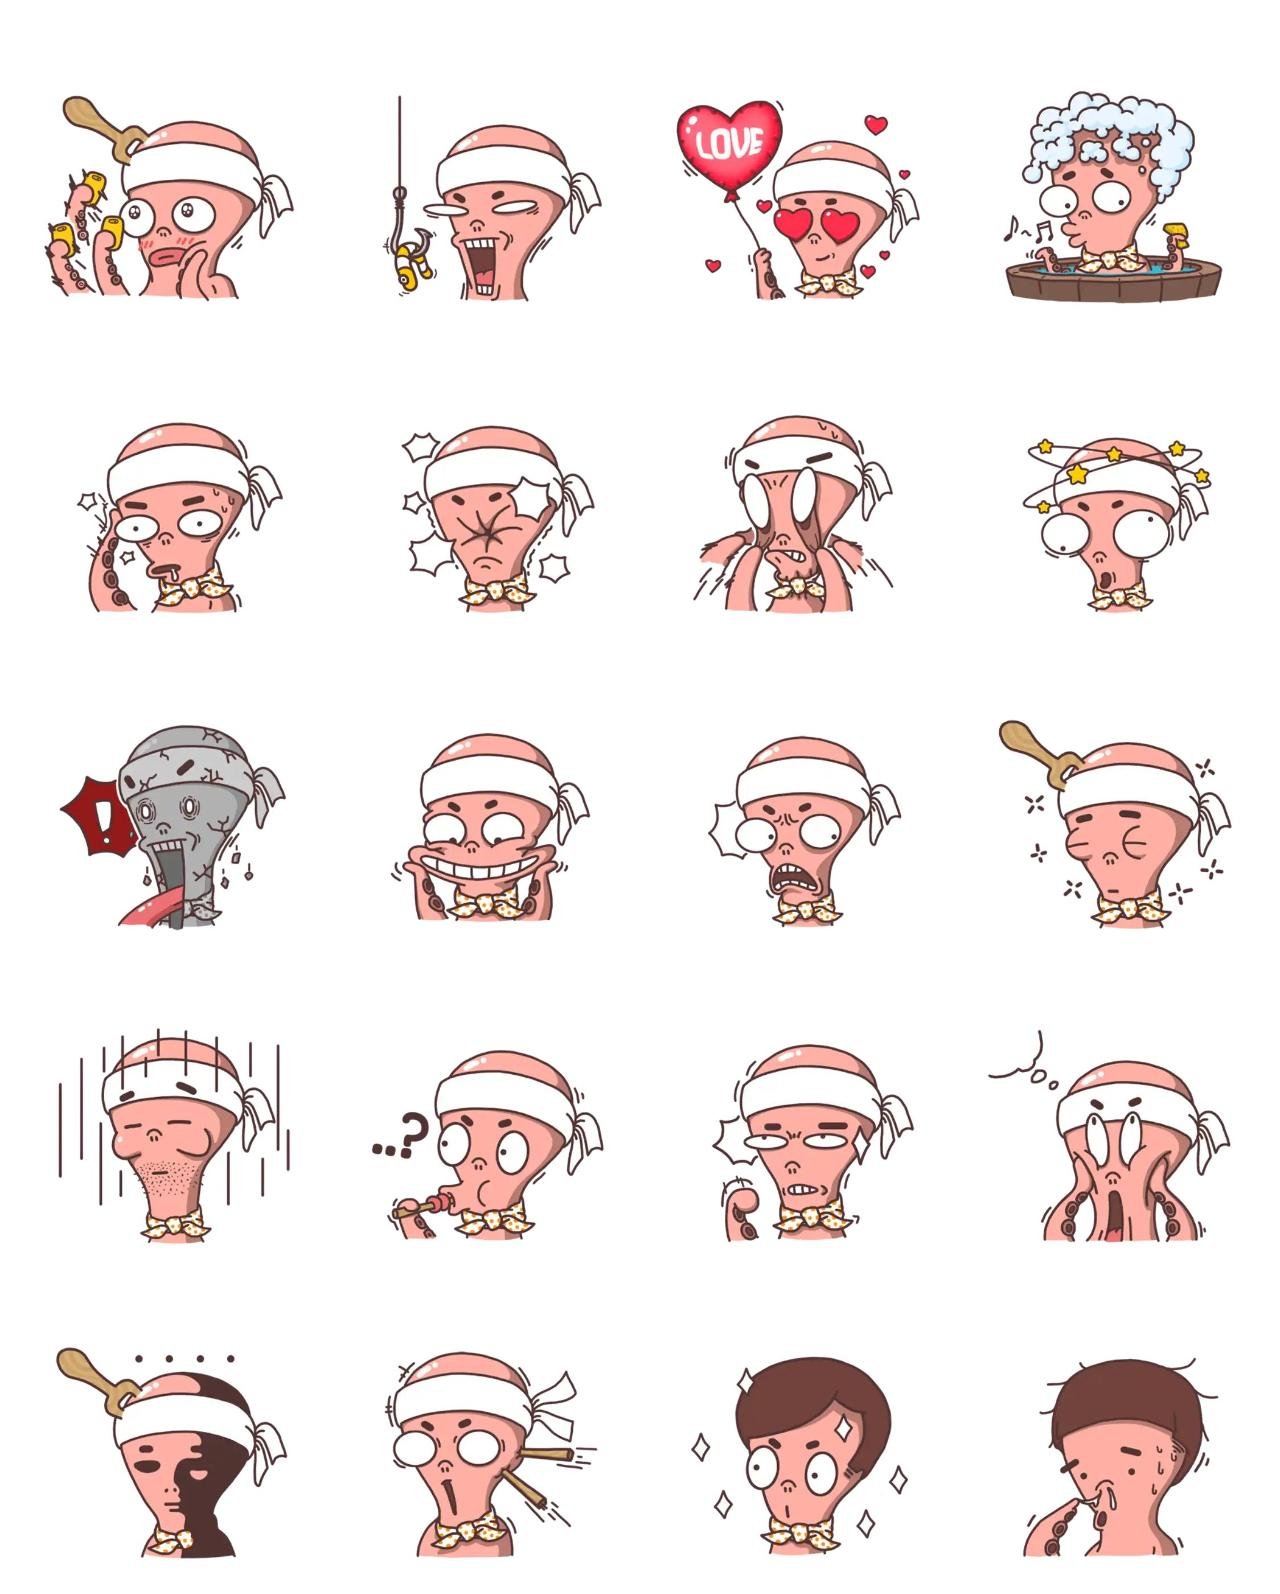 OKO Food/Drink,Gag sticker pack for Whatsapp, Telegram, Signal, and others chatting and message apps